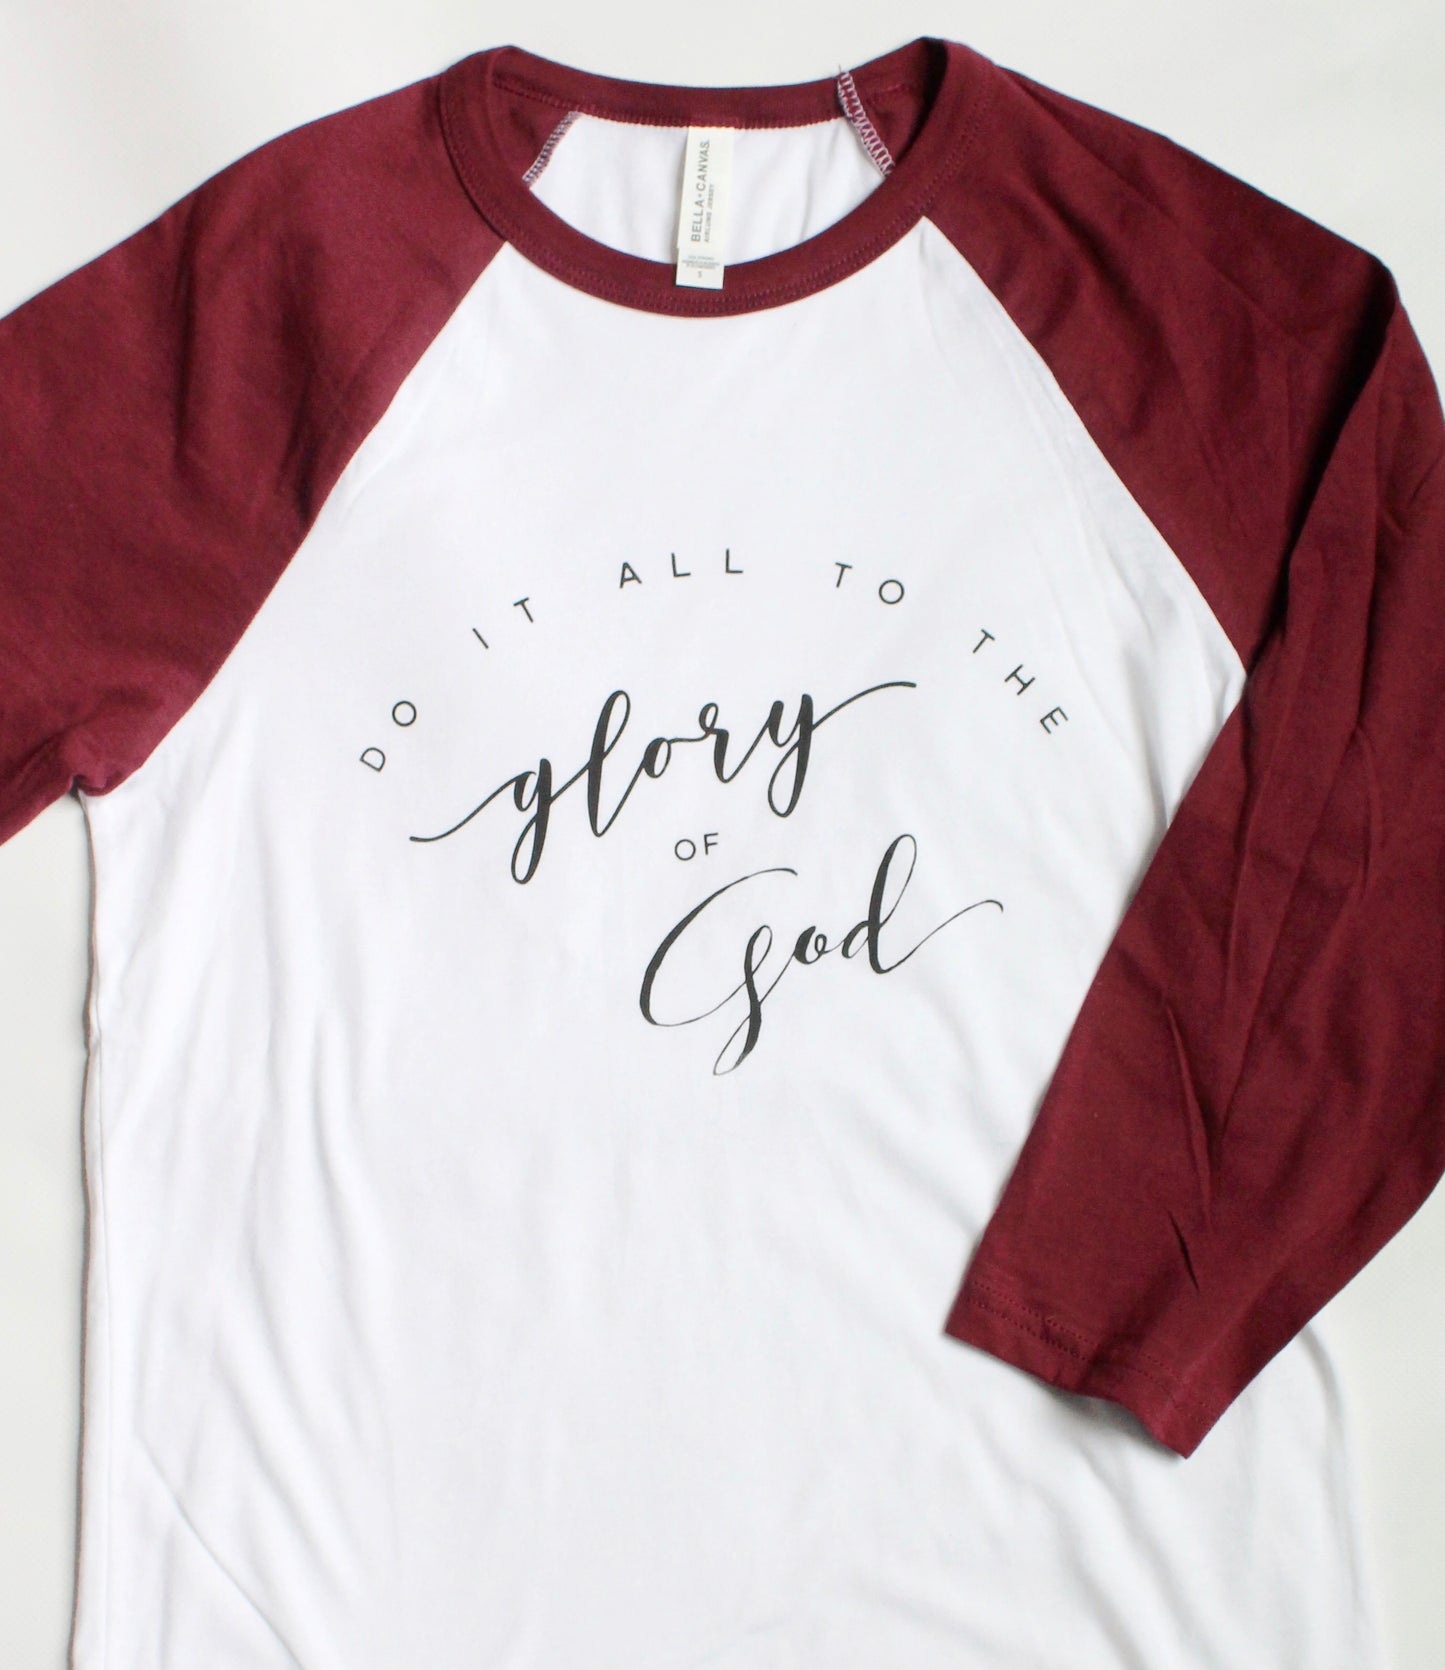 Do It All to the Glory of God | Adult 3/4 Sleeve